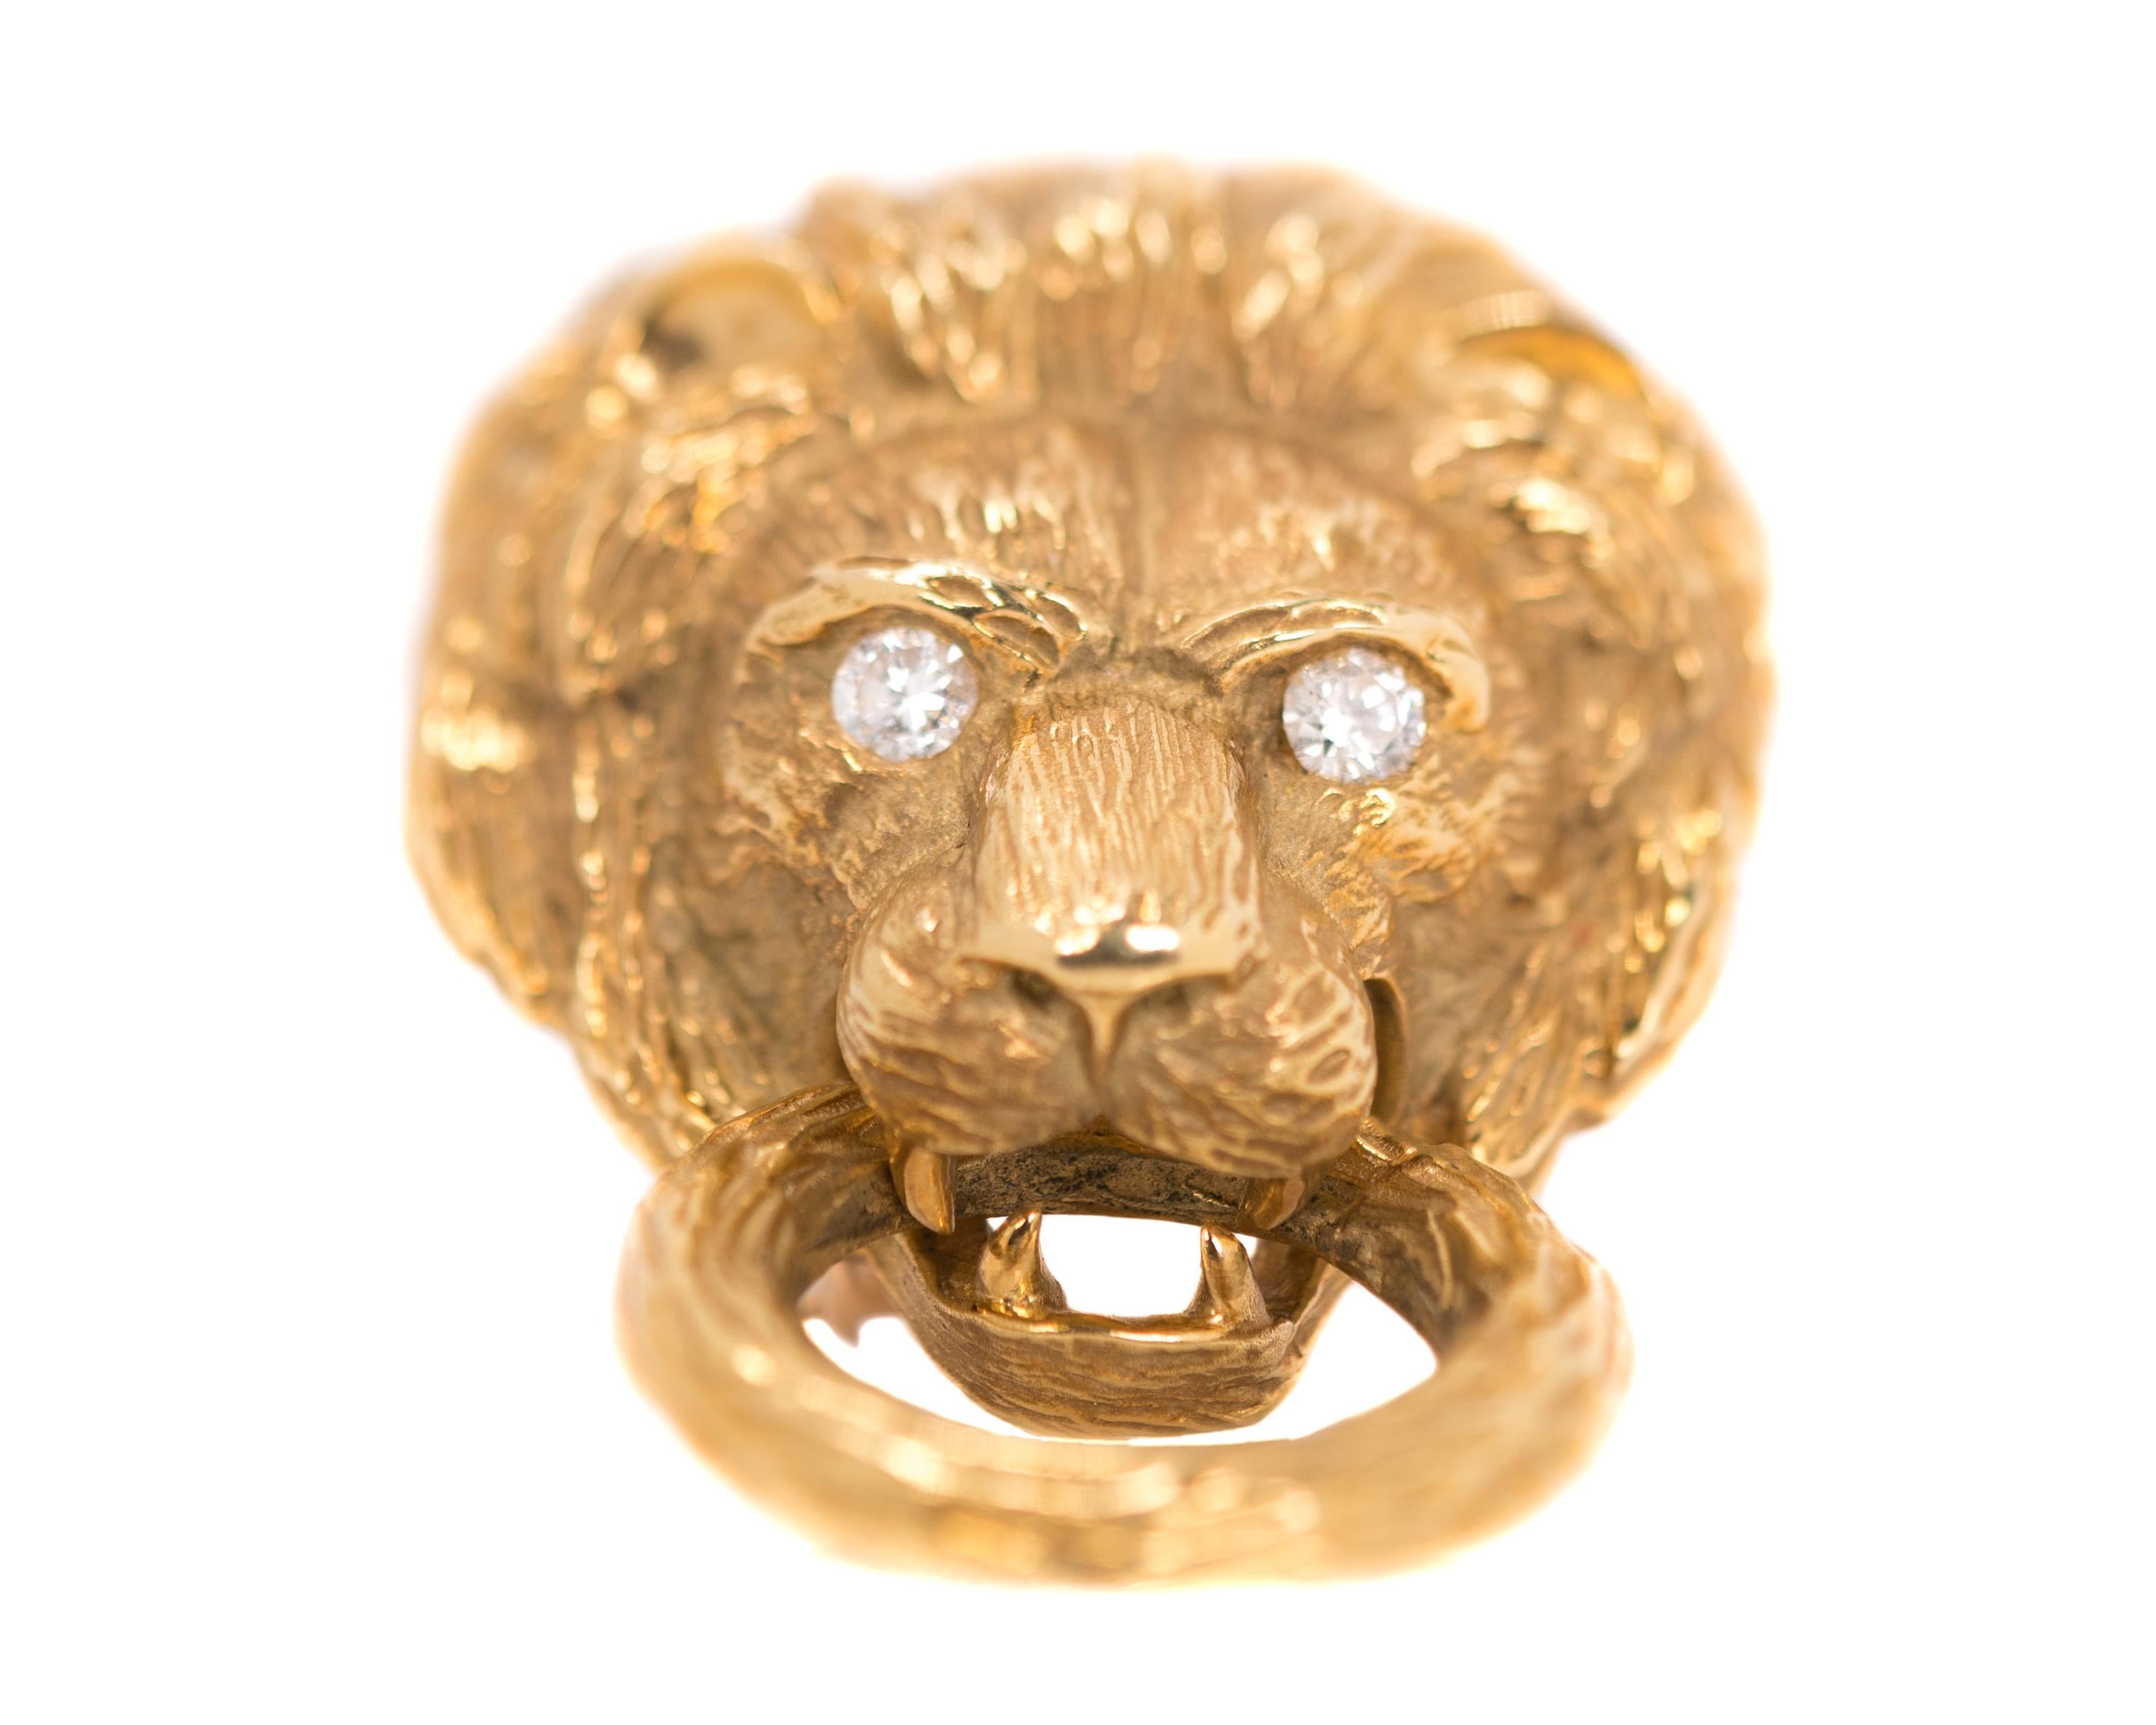 1960s Retro Van Cleef and Arpels Lion Brooch - 18 Karat Yellow Gold

Features:
0.35 carats Round Brilliant Diamonds 
Diamond Eyes
Moving Ring 
Textured 18 Karat Yellow Gold 
2 Prong Pin for extra stability
Safety clasp

Dimensions: 50 x 32